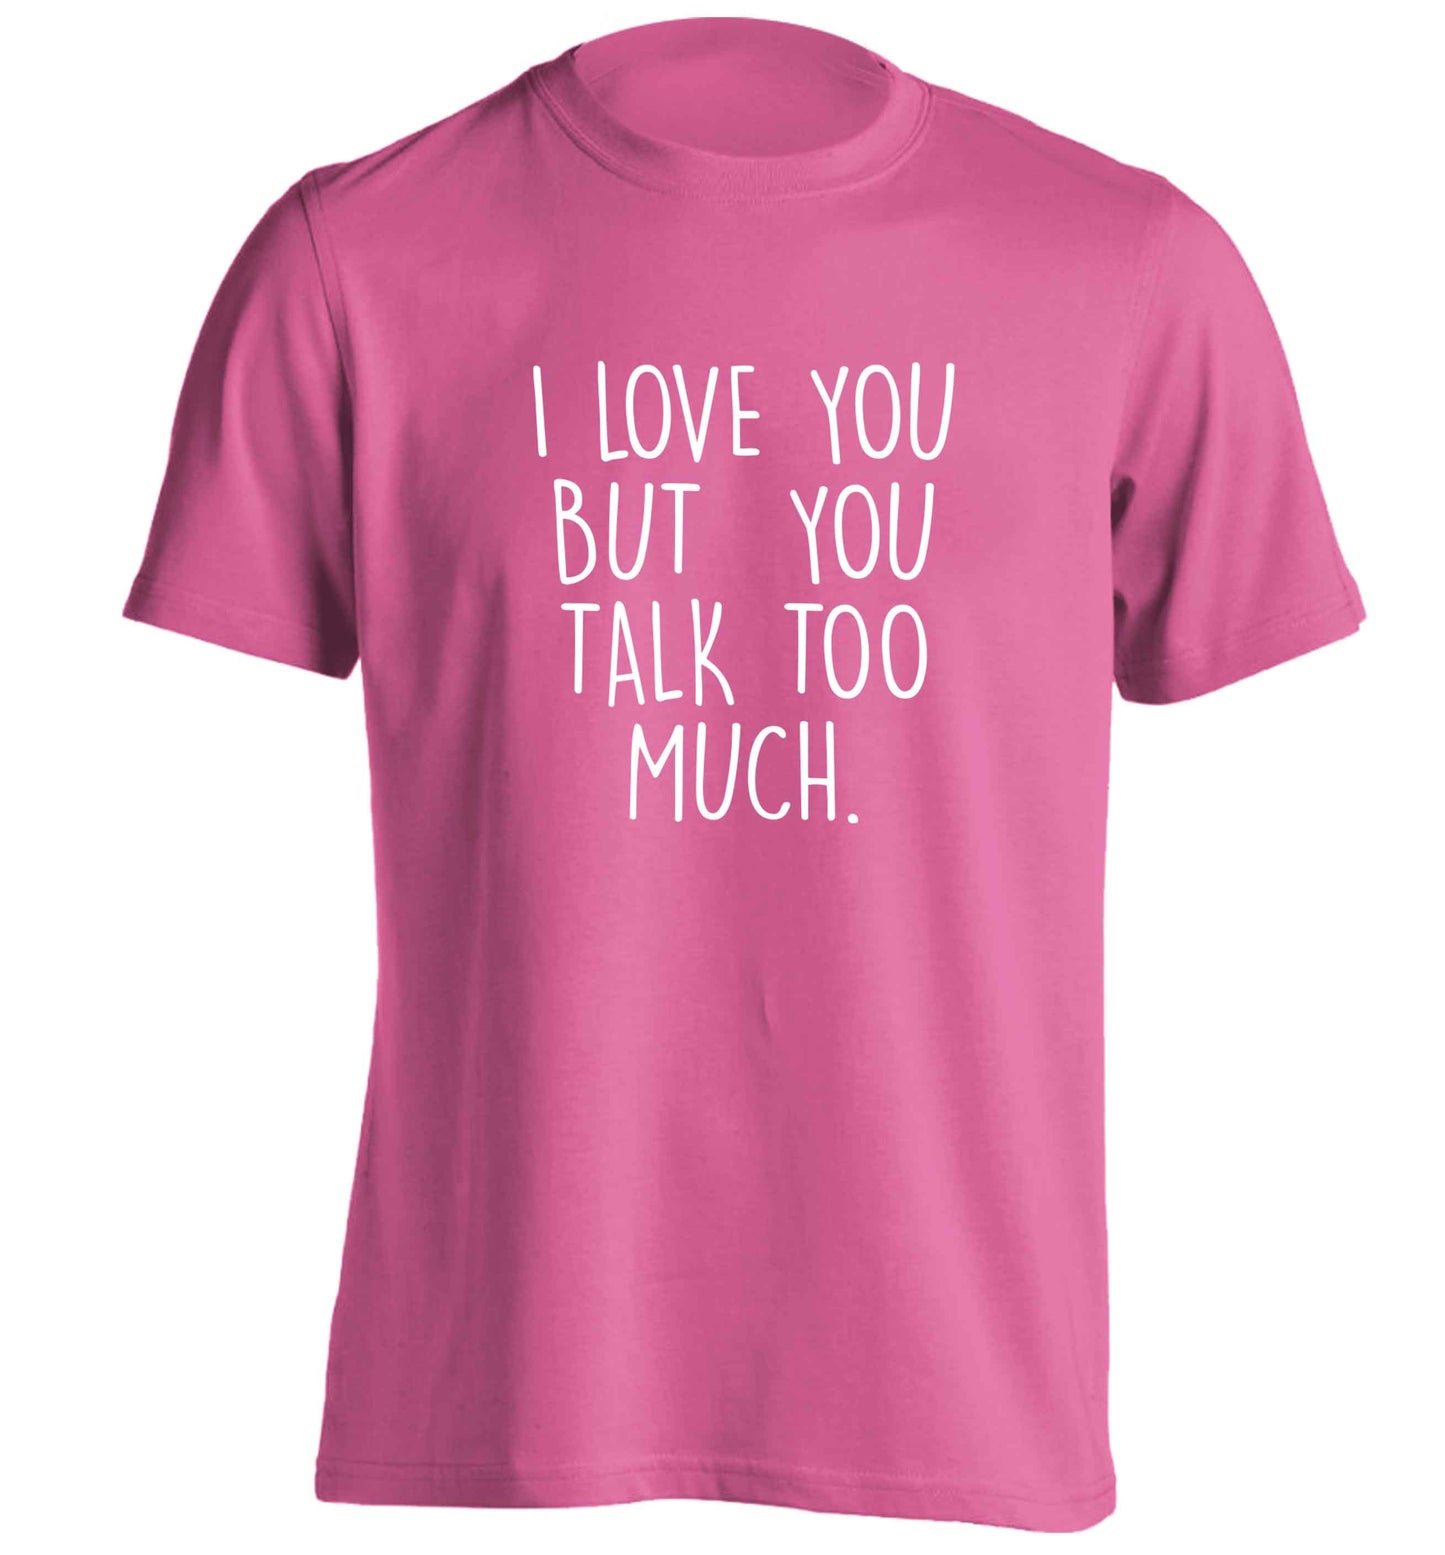 I love you but you talk too much adults unisex pink Tshirt 2XL